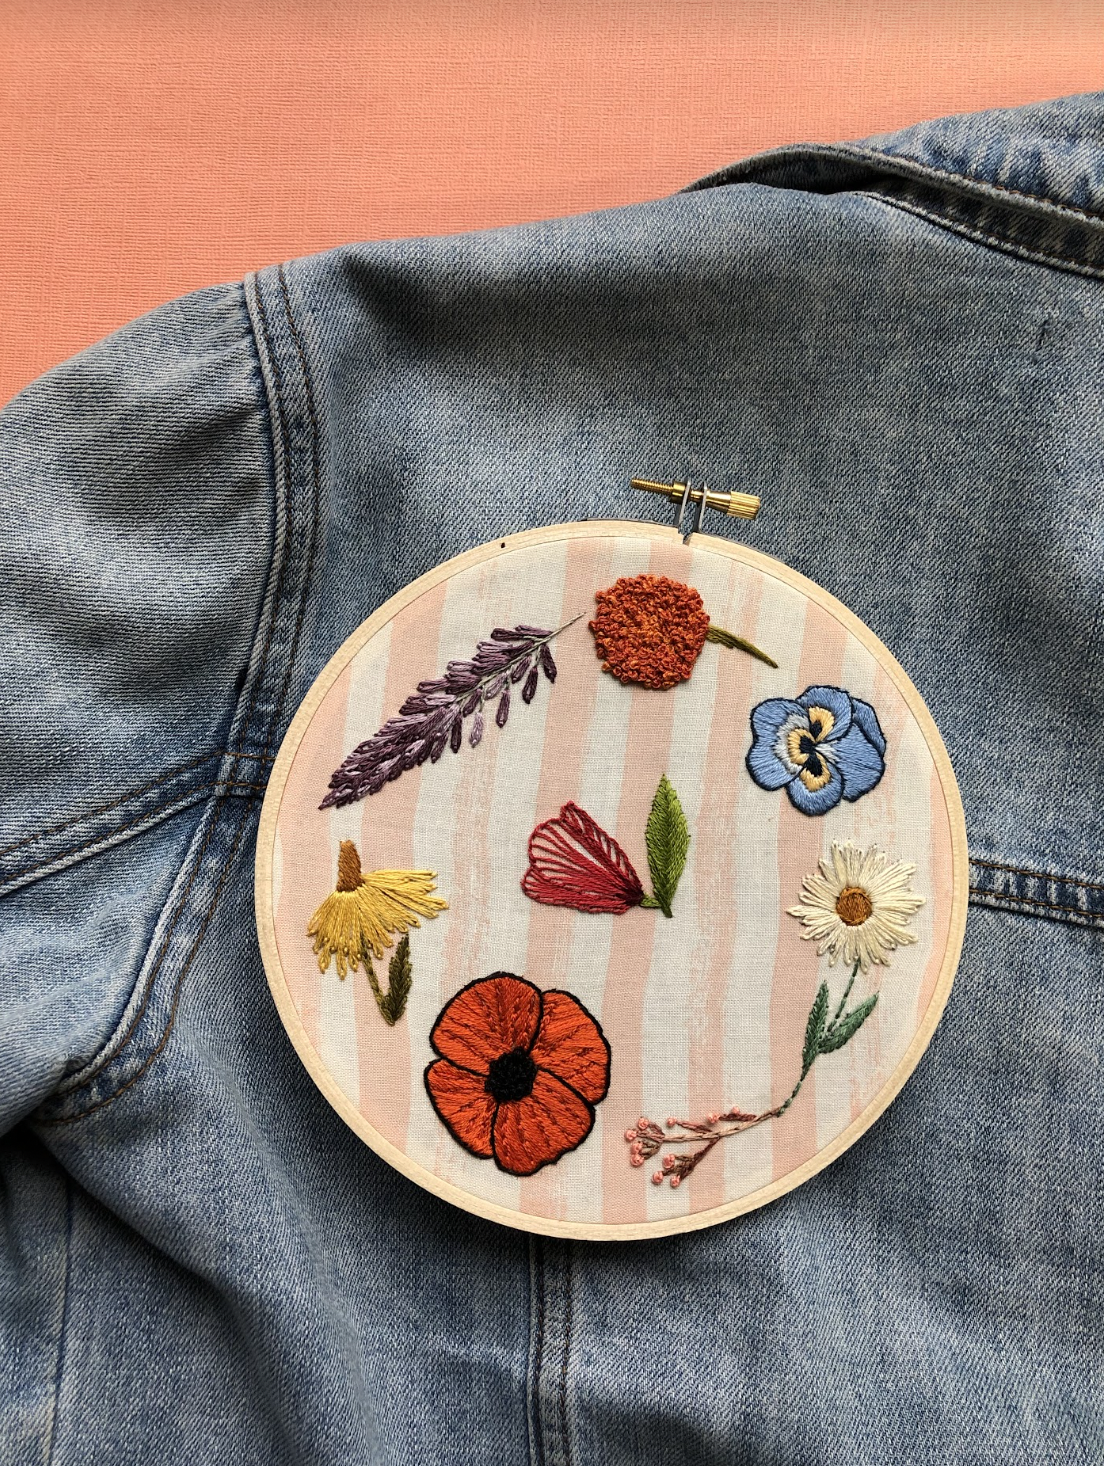 How to embroider jeans with a vintage floral design - Gathered